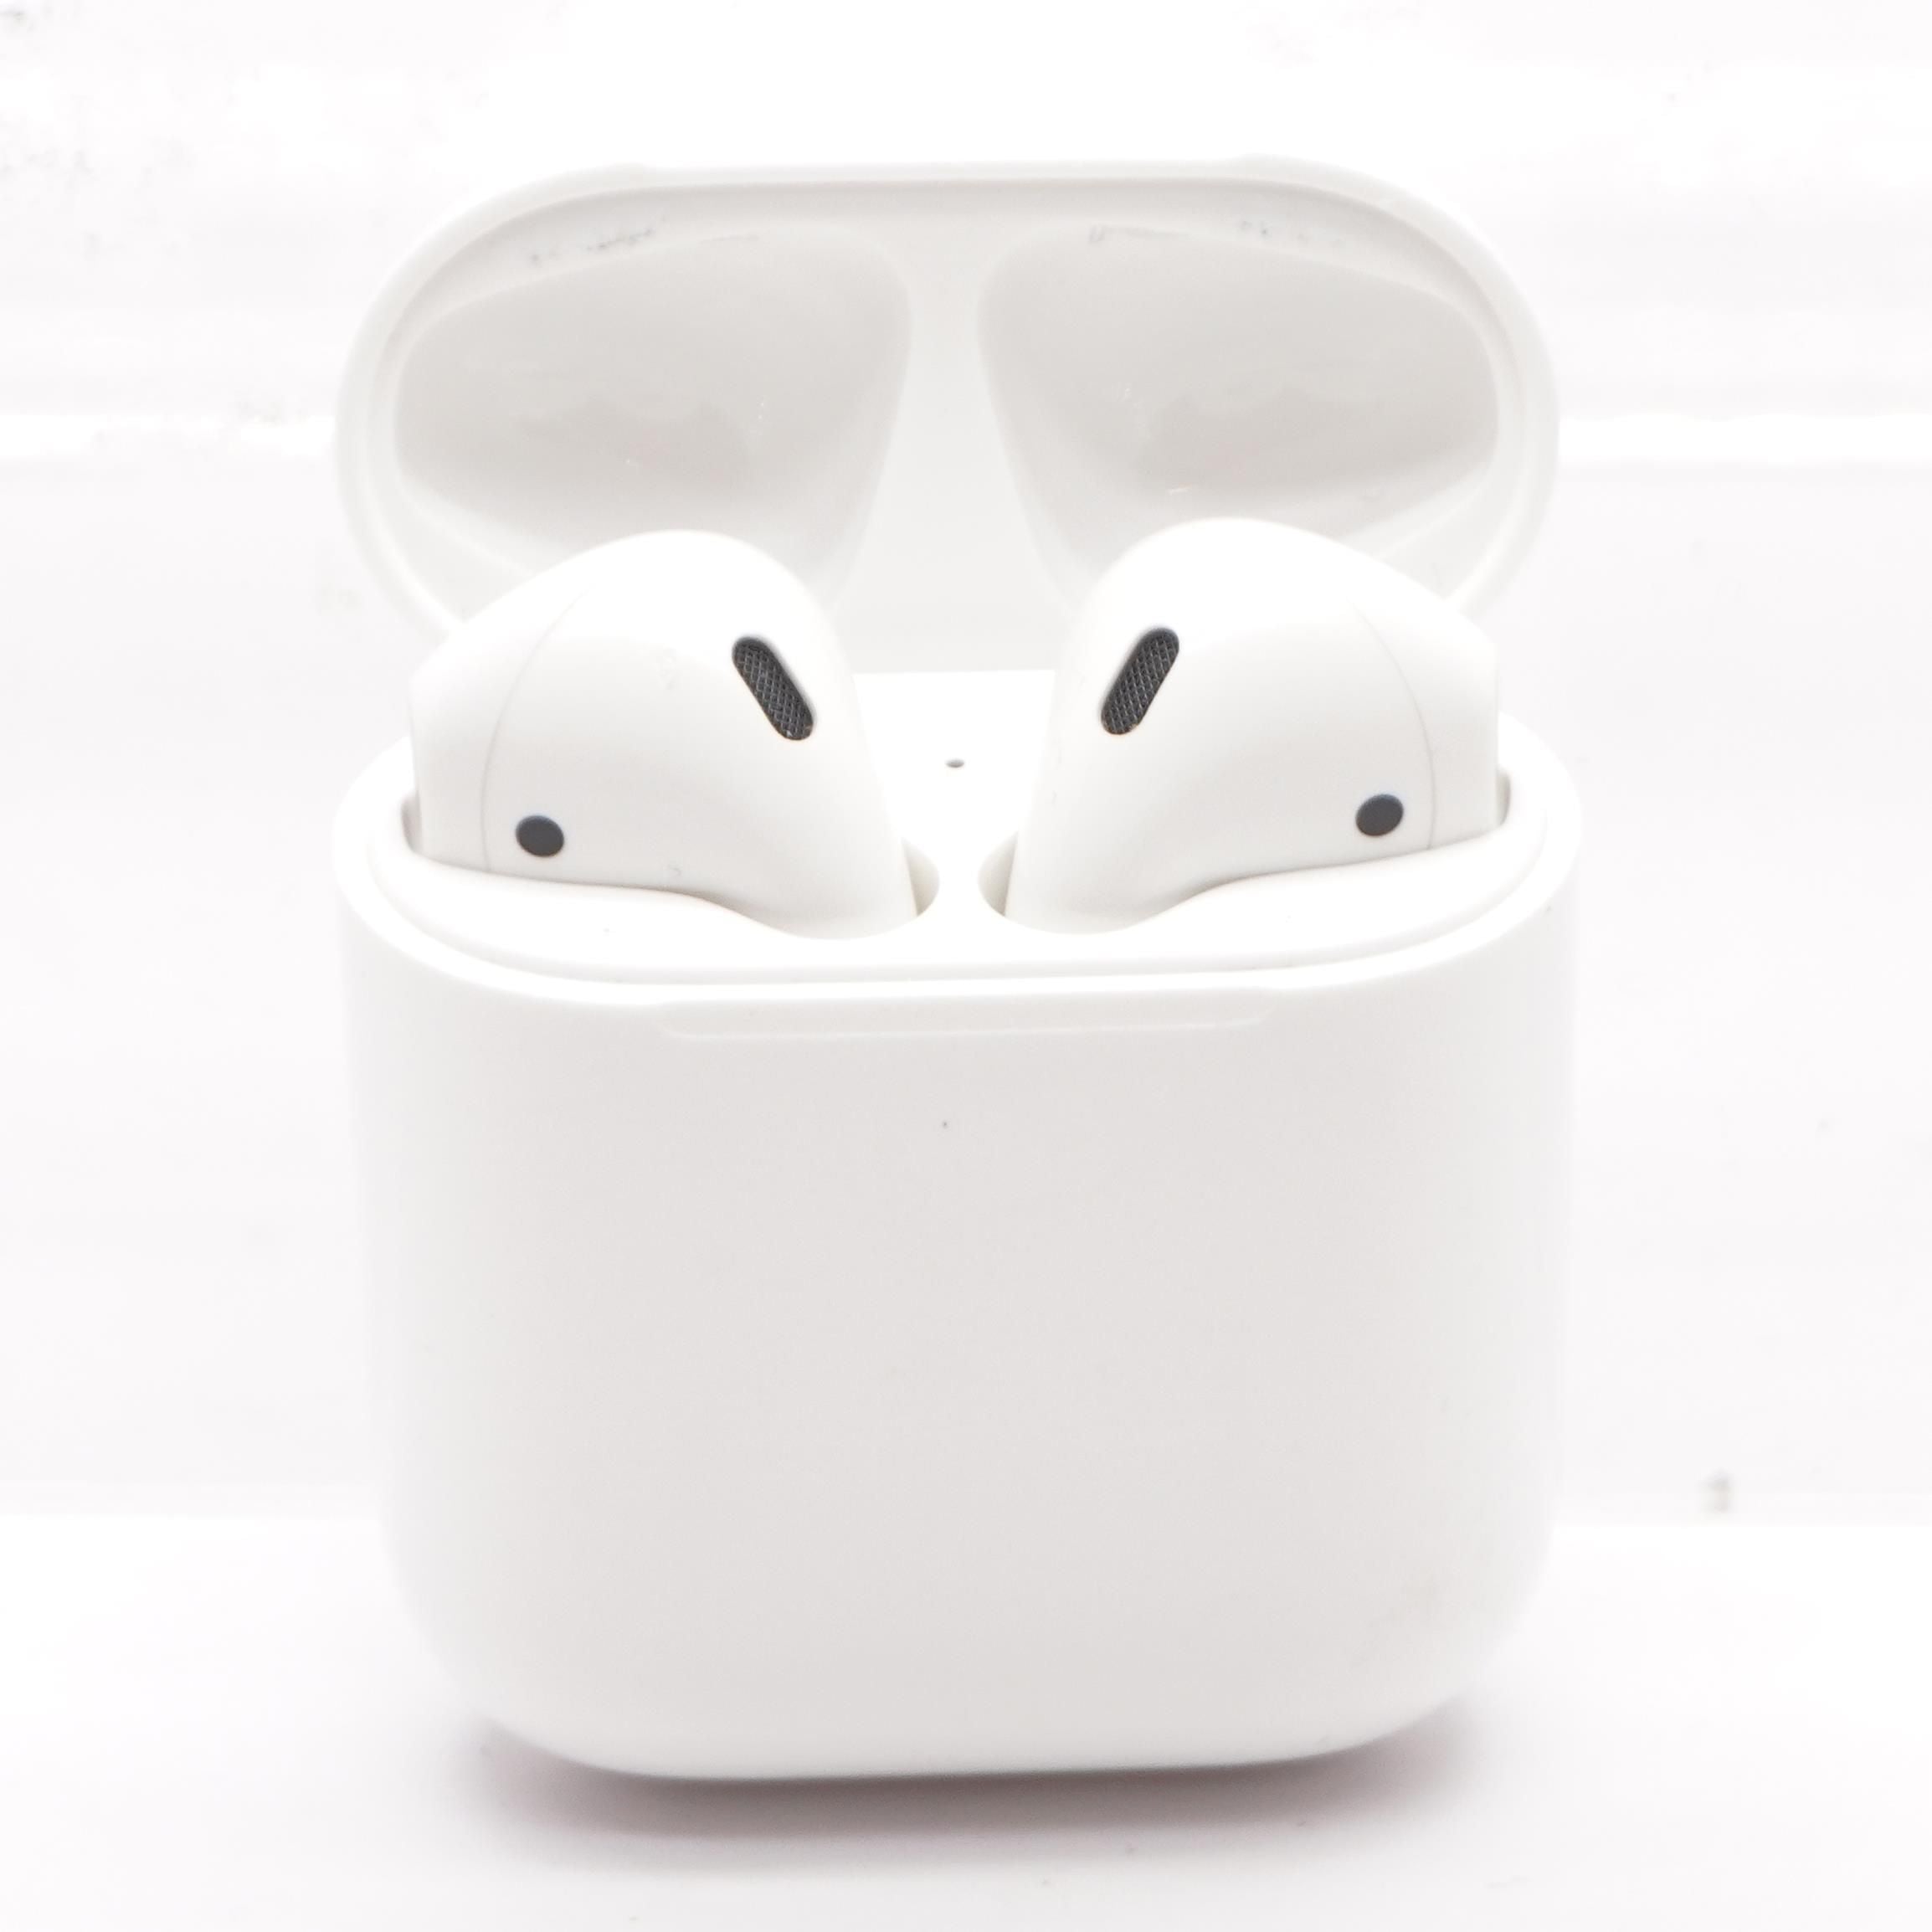 ORIGINAL APPLE AIRPODS A2032 2nd Generation EMPTY BOX & MANUAL - BOX ONLY